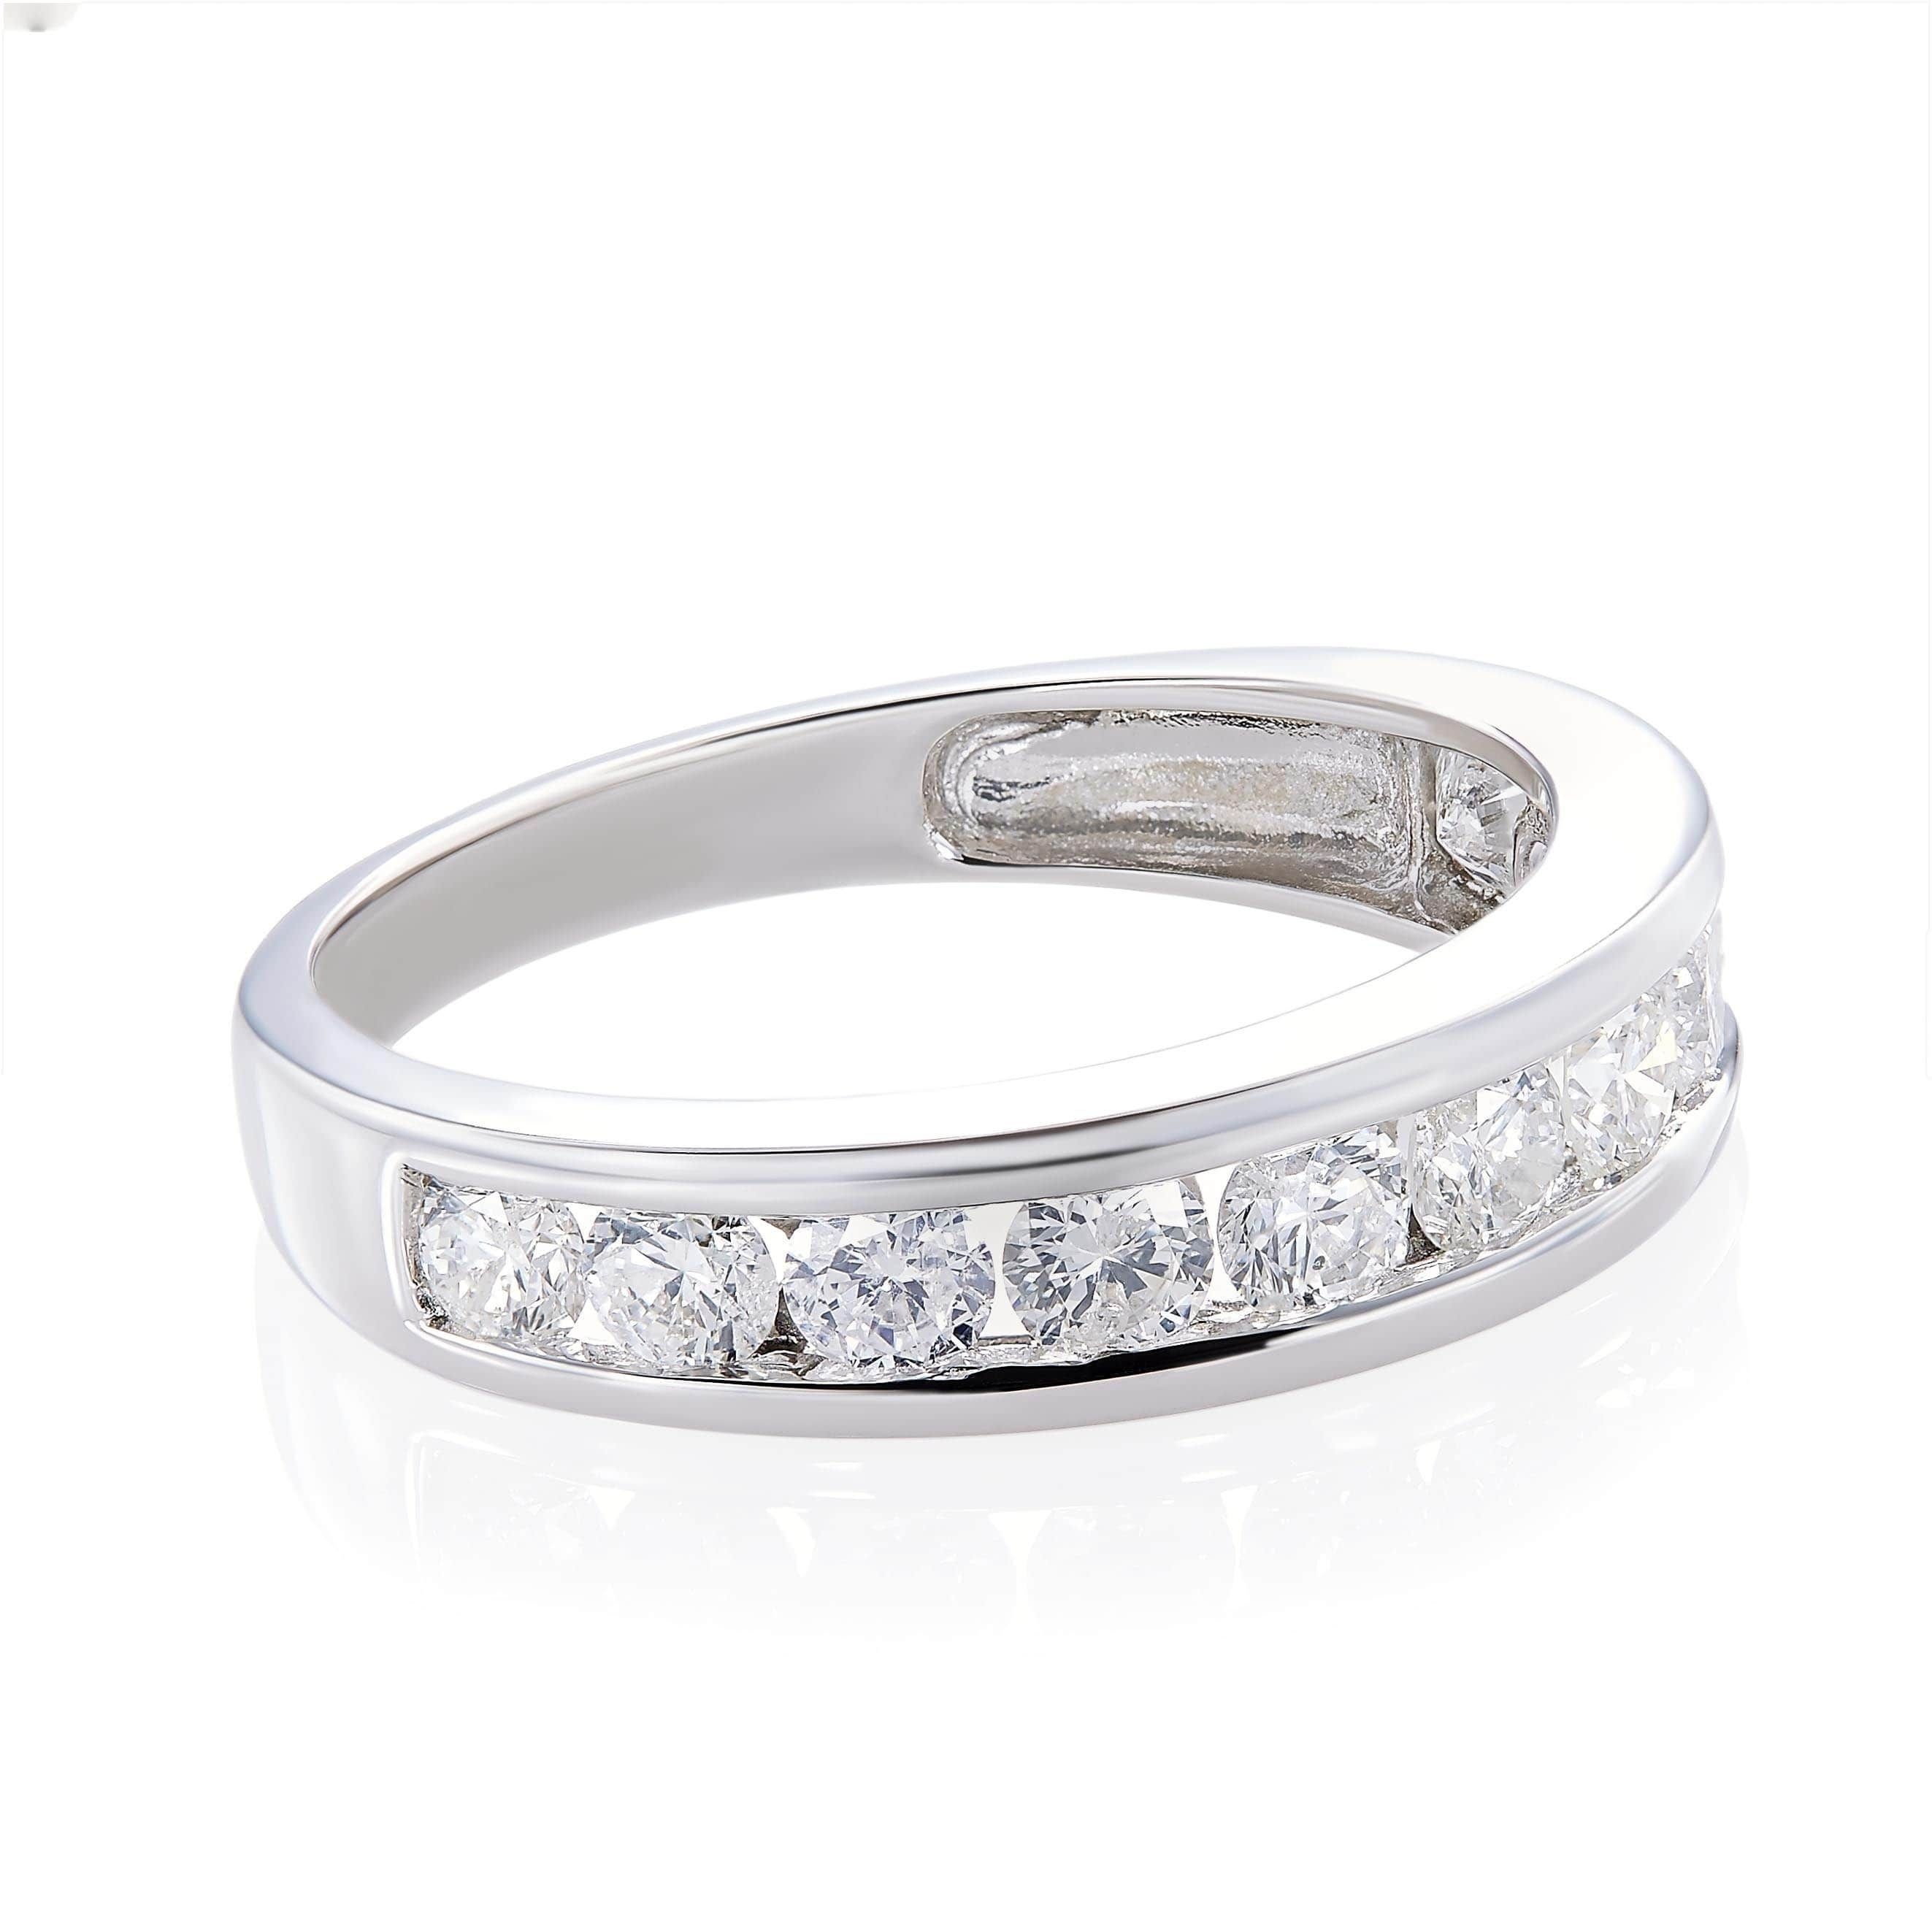 Shop Miadora 14k White Gold Diamond Semi Eternity Wedding Band – On Intended For 2017 Diamond Eternity Wedding Bands In 14k Gold (View 12 of 15)